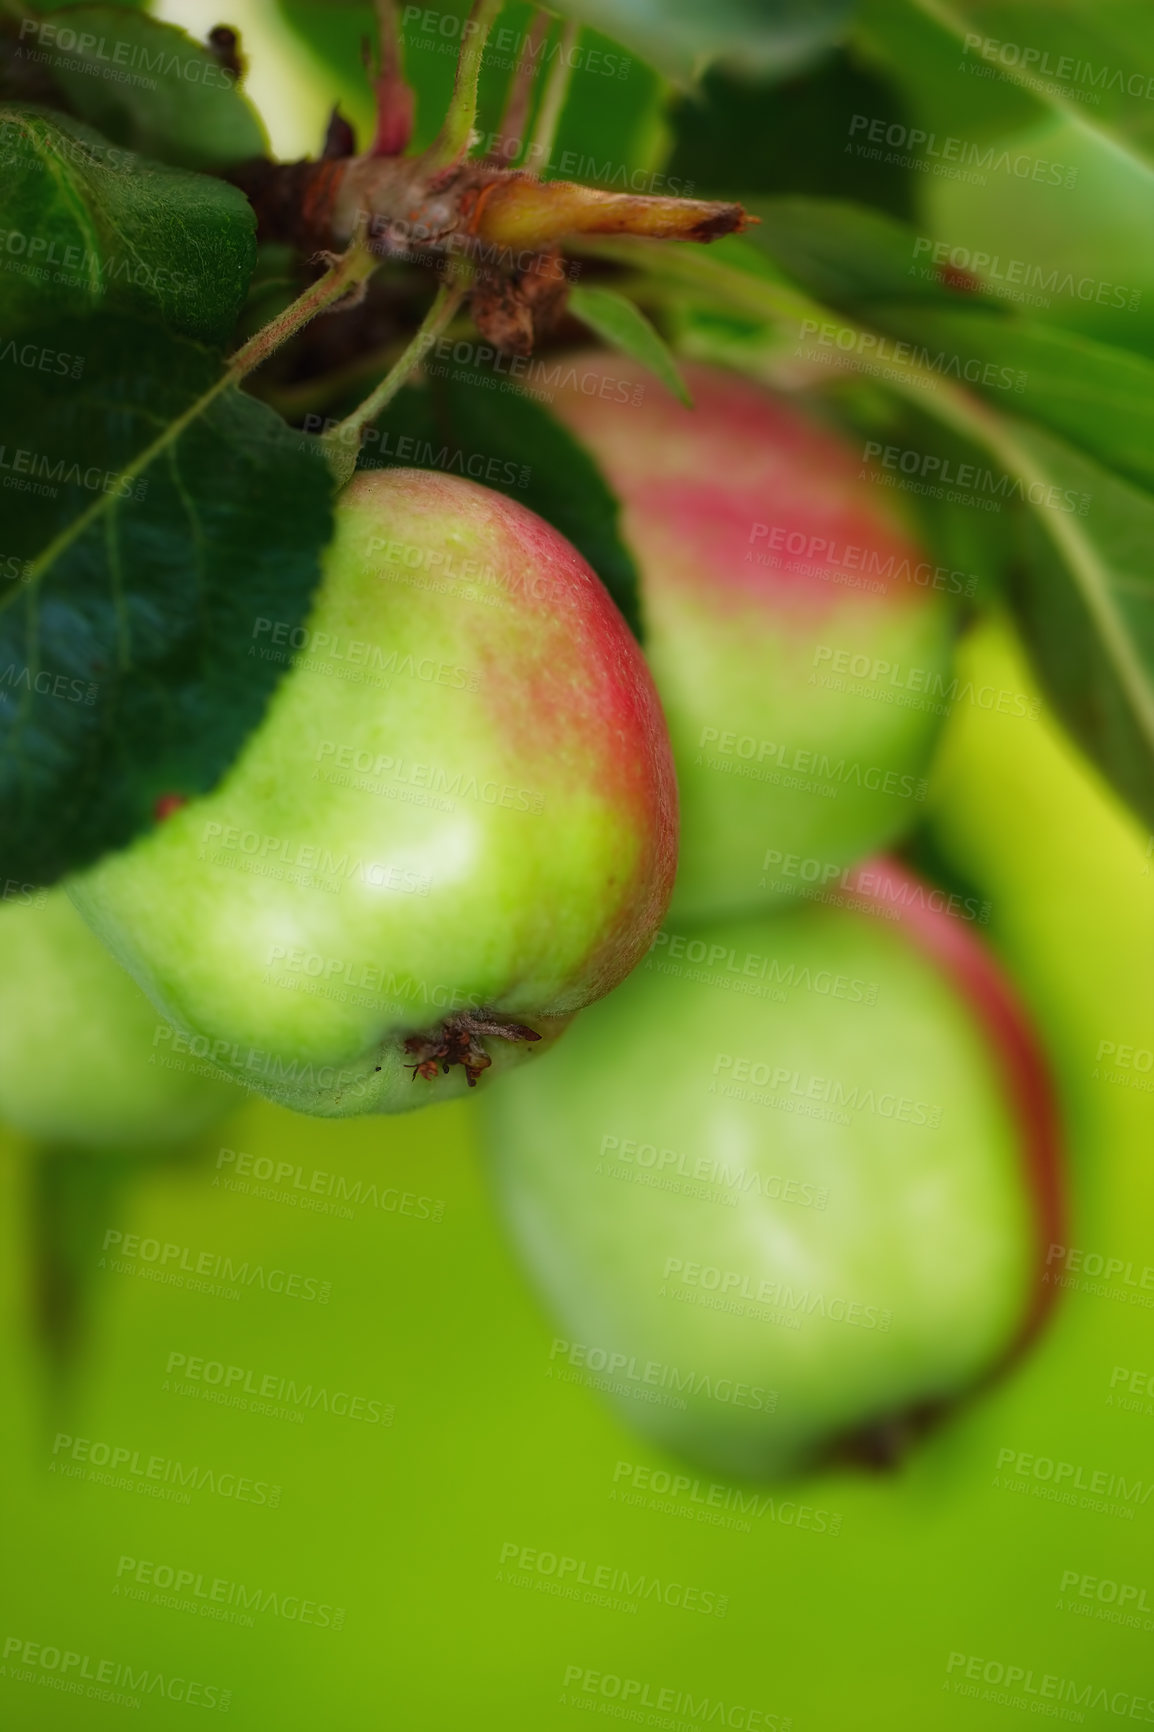 Buy stock photo Closeup of ripe red apples hanging on a branch of a tree in an orchard outside against a blurred green background. Organic agriculture and sustainable fruit farming, fresh produce growing on a farm